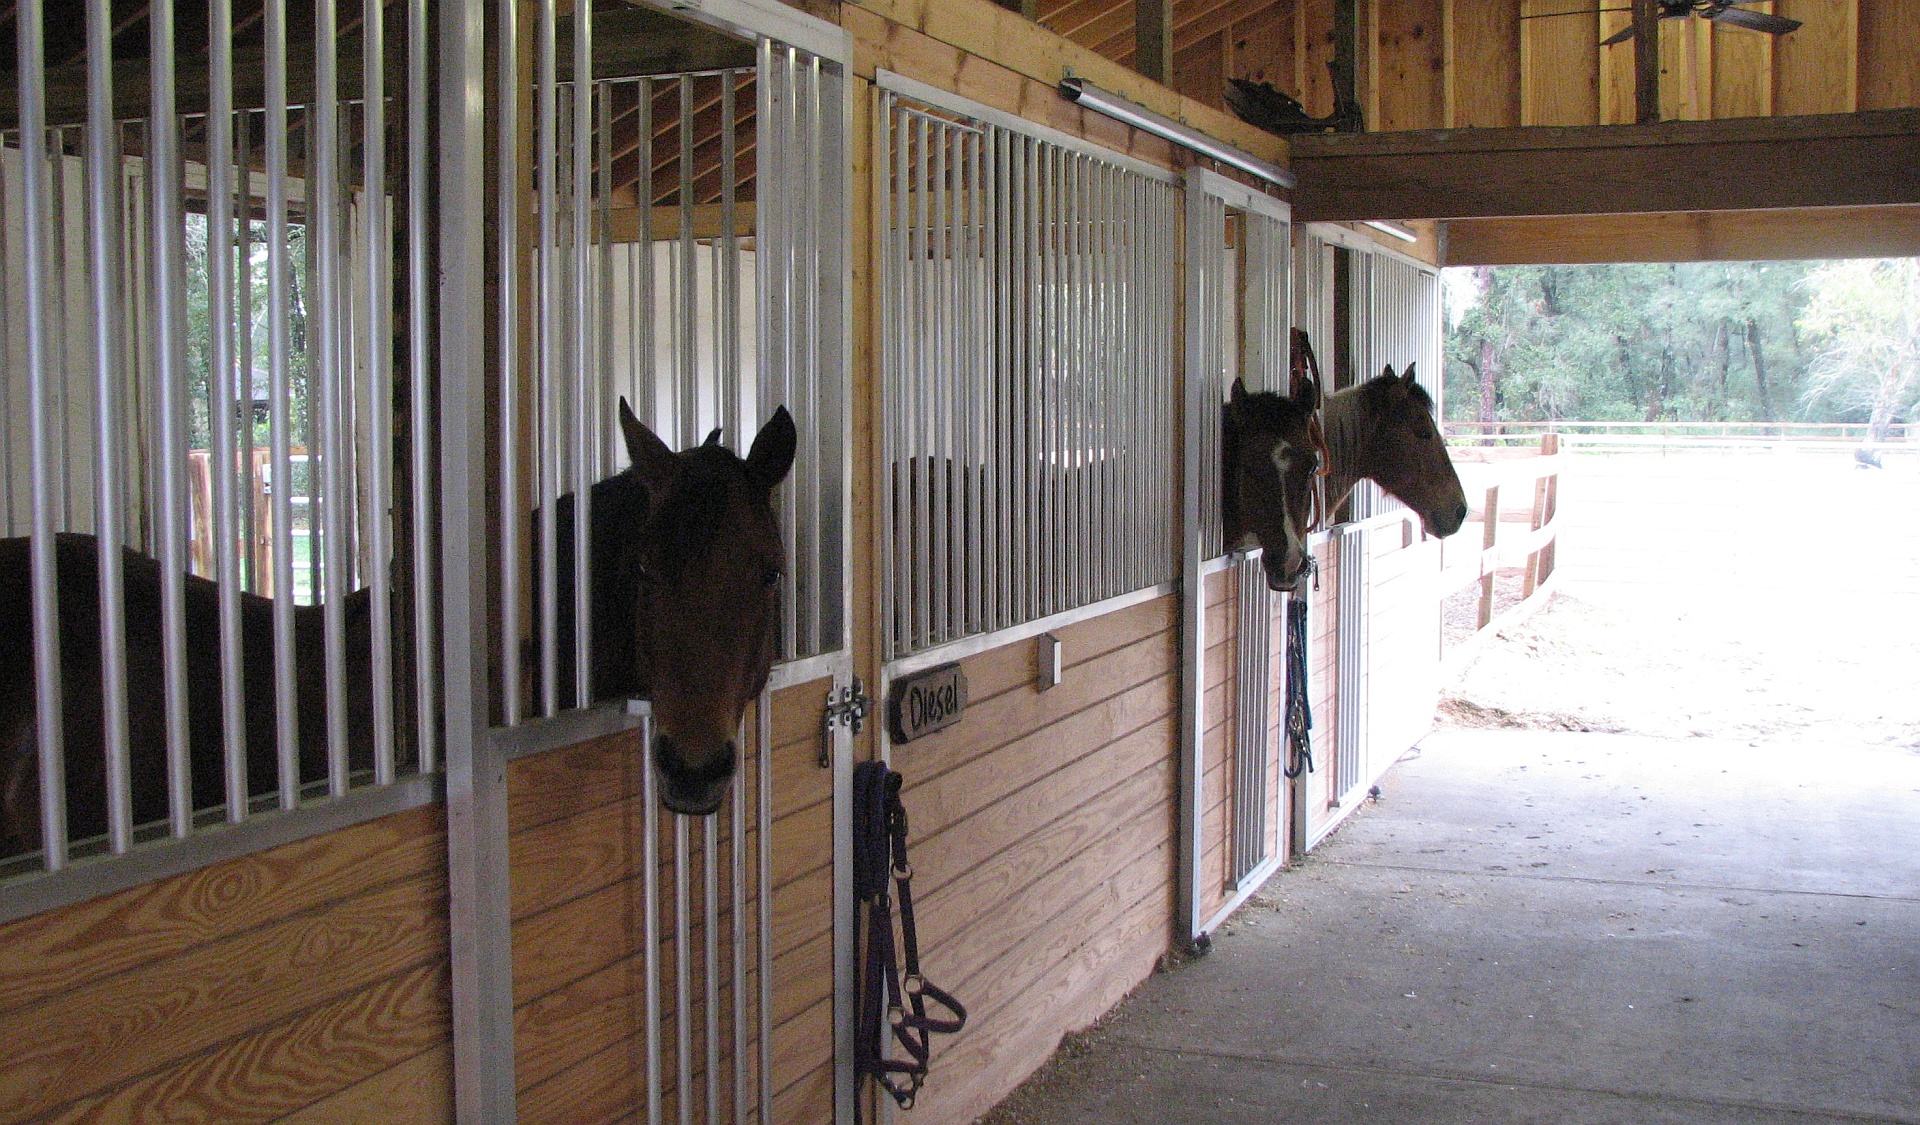 Horses using the fold down top to look through into aisle way.